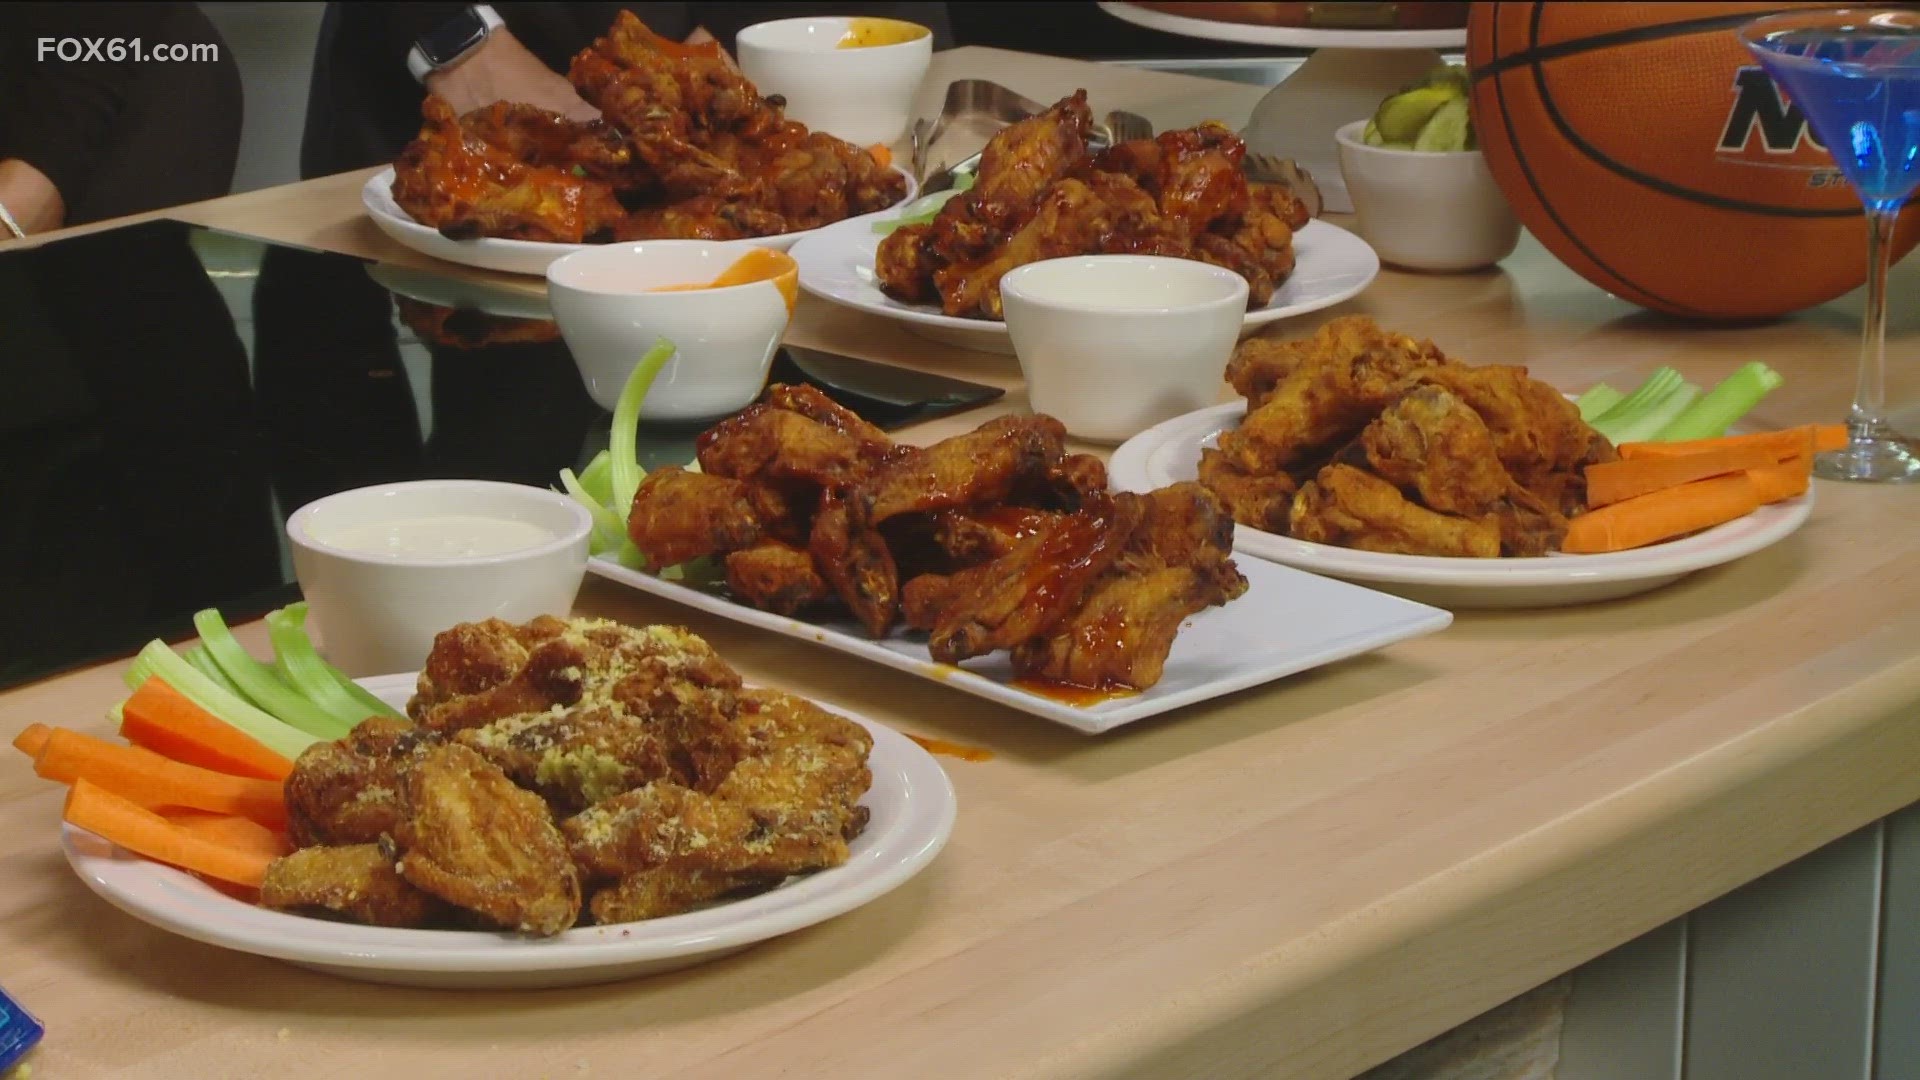 From Buffalo to teriyaki to sweet chili, Diamond Pub & Grill offers a variety of wings for March Madness.